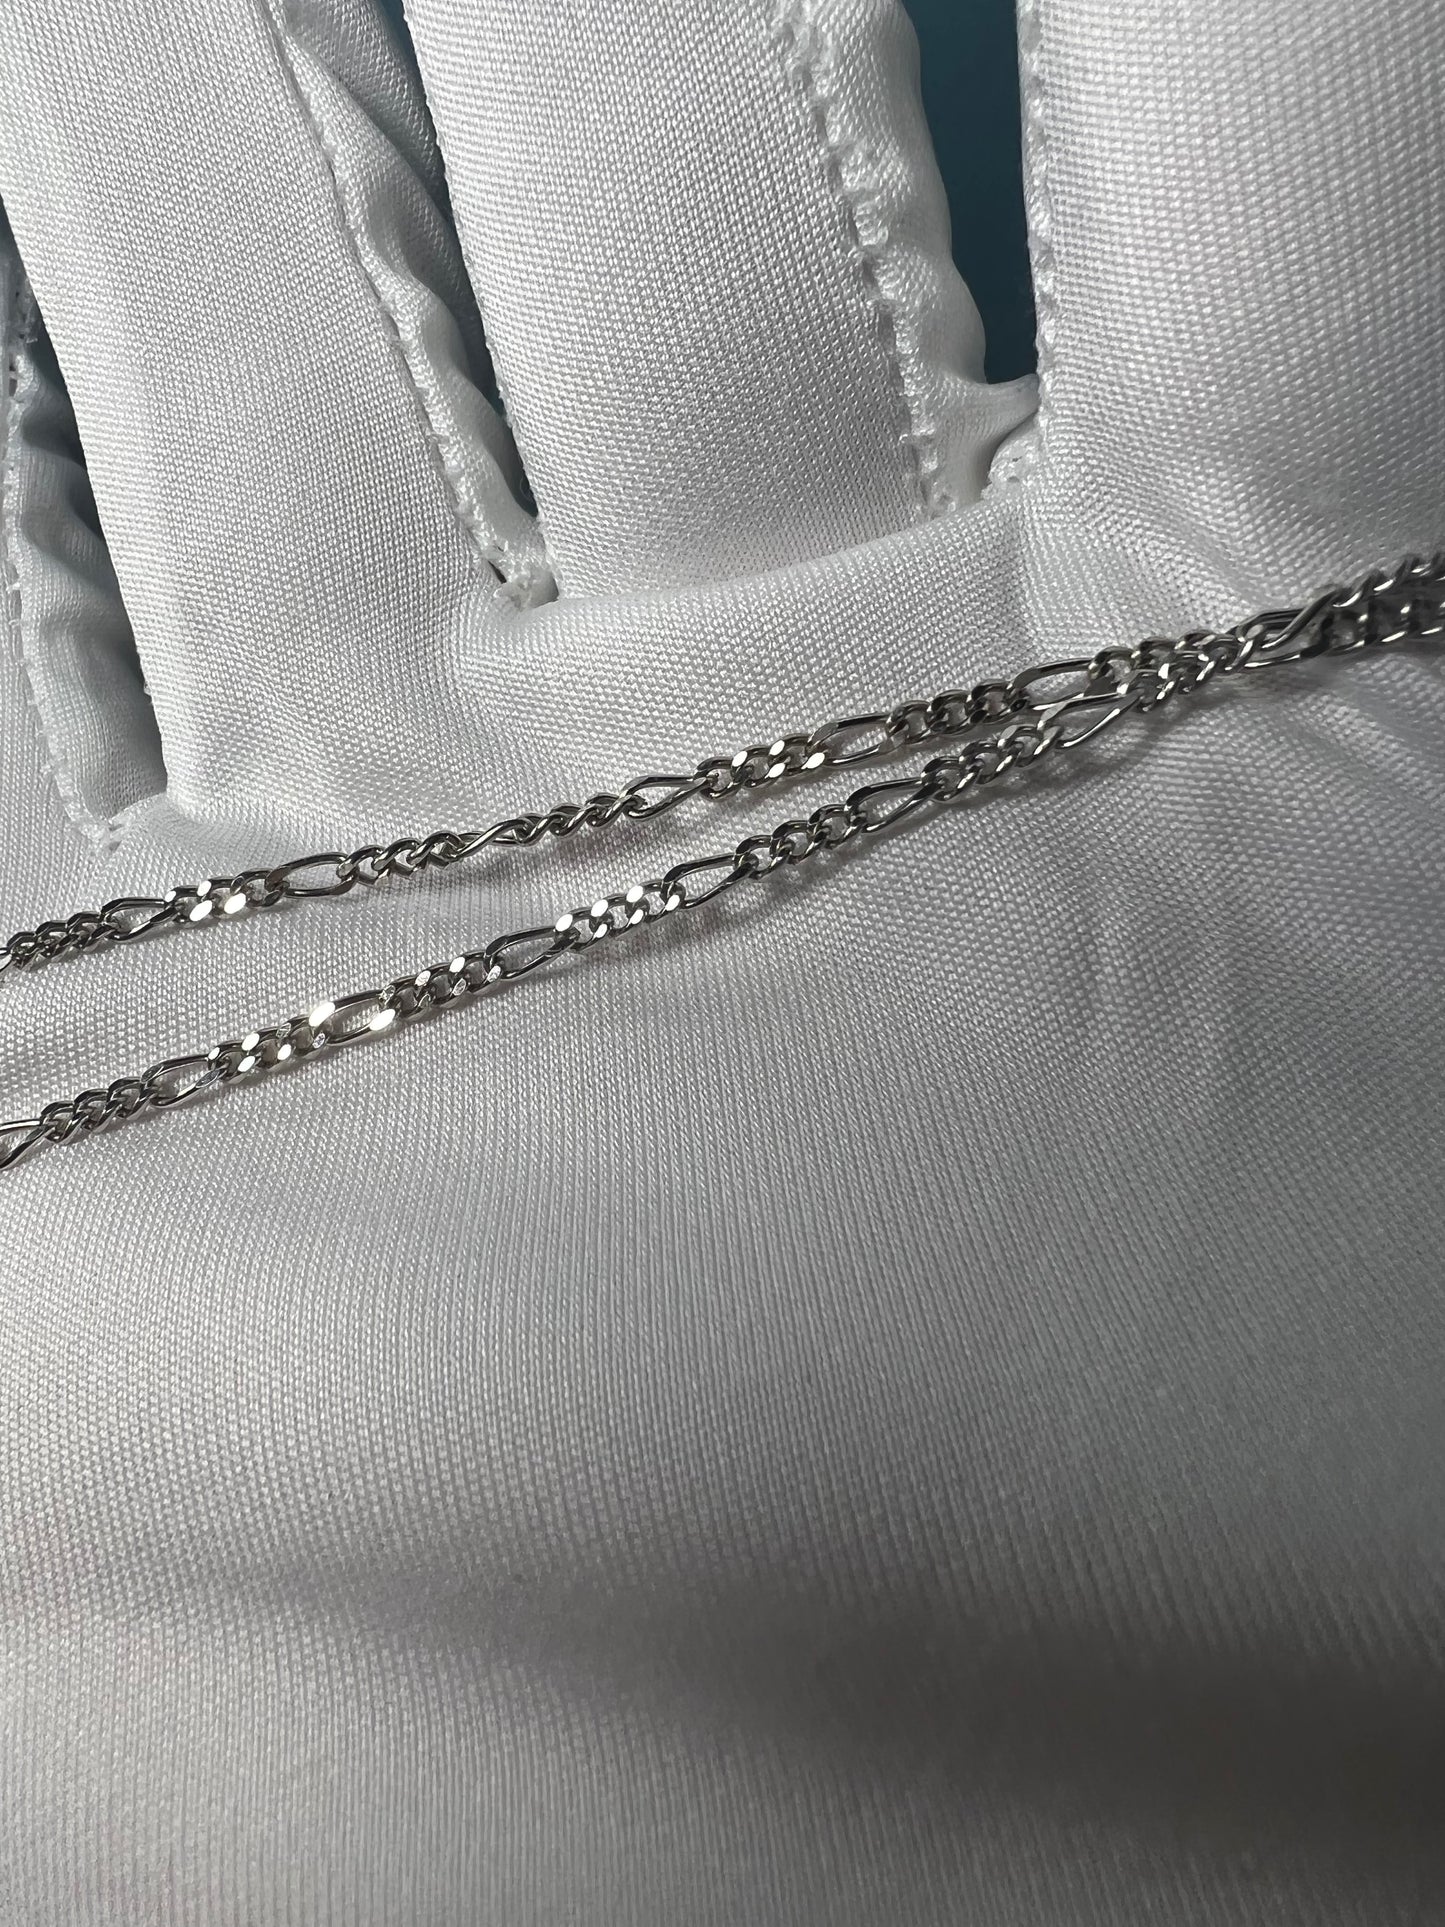 Cuban Link Chain in 14k White Gold 20”